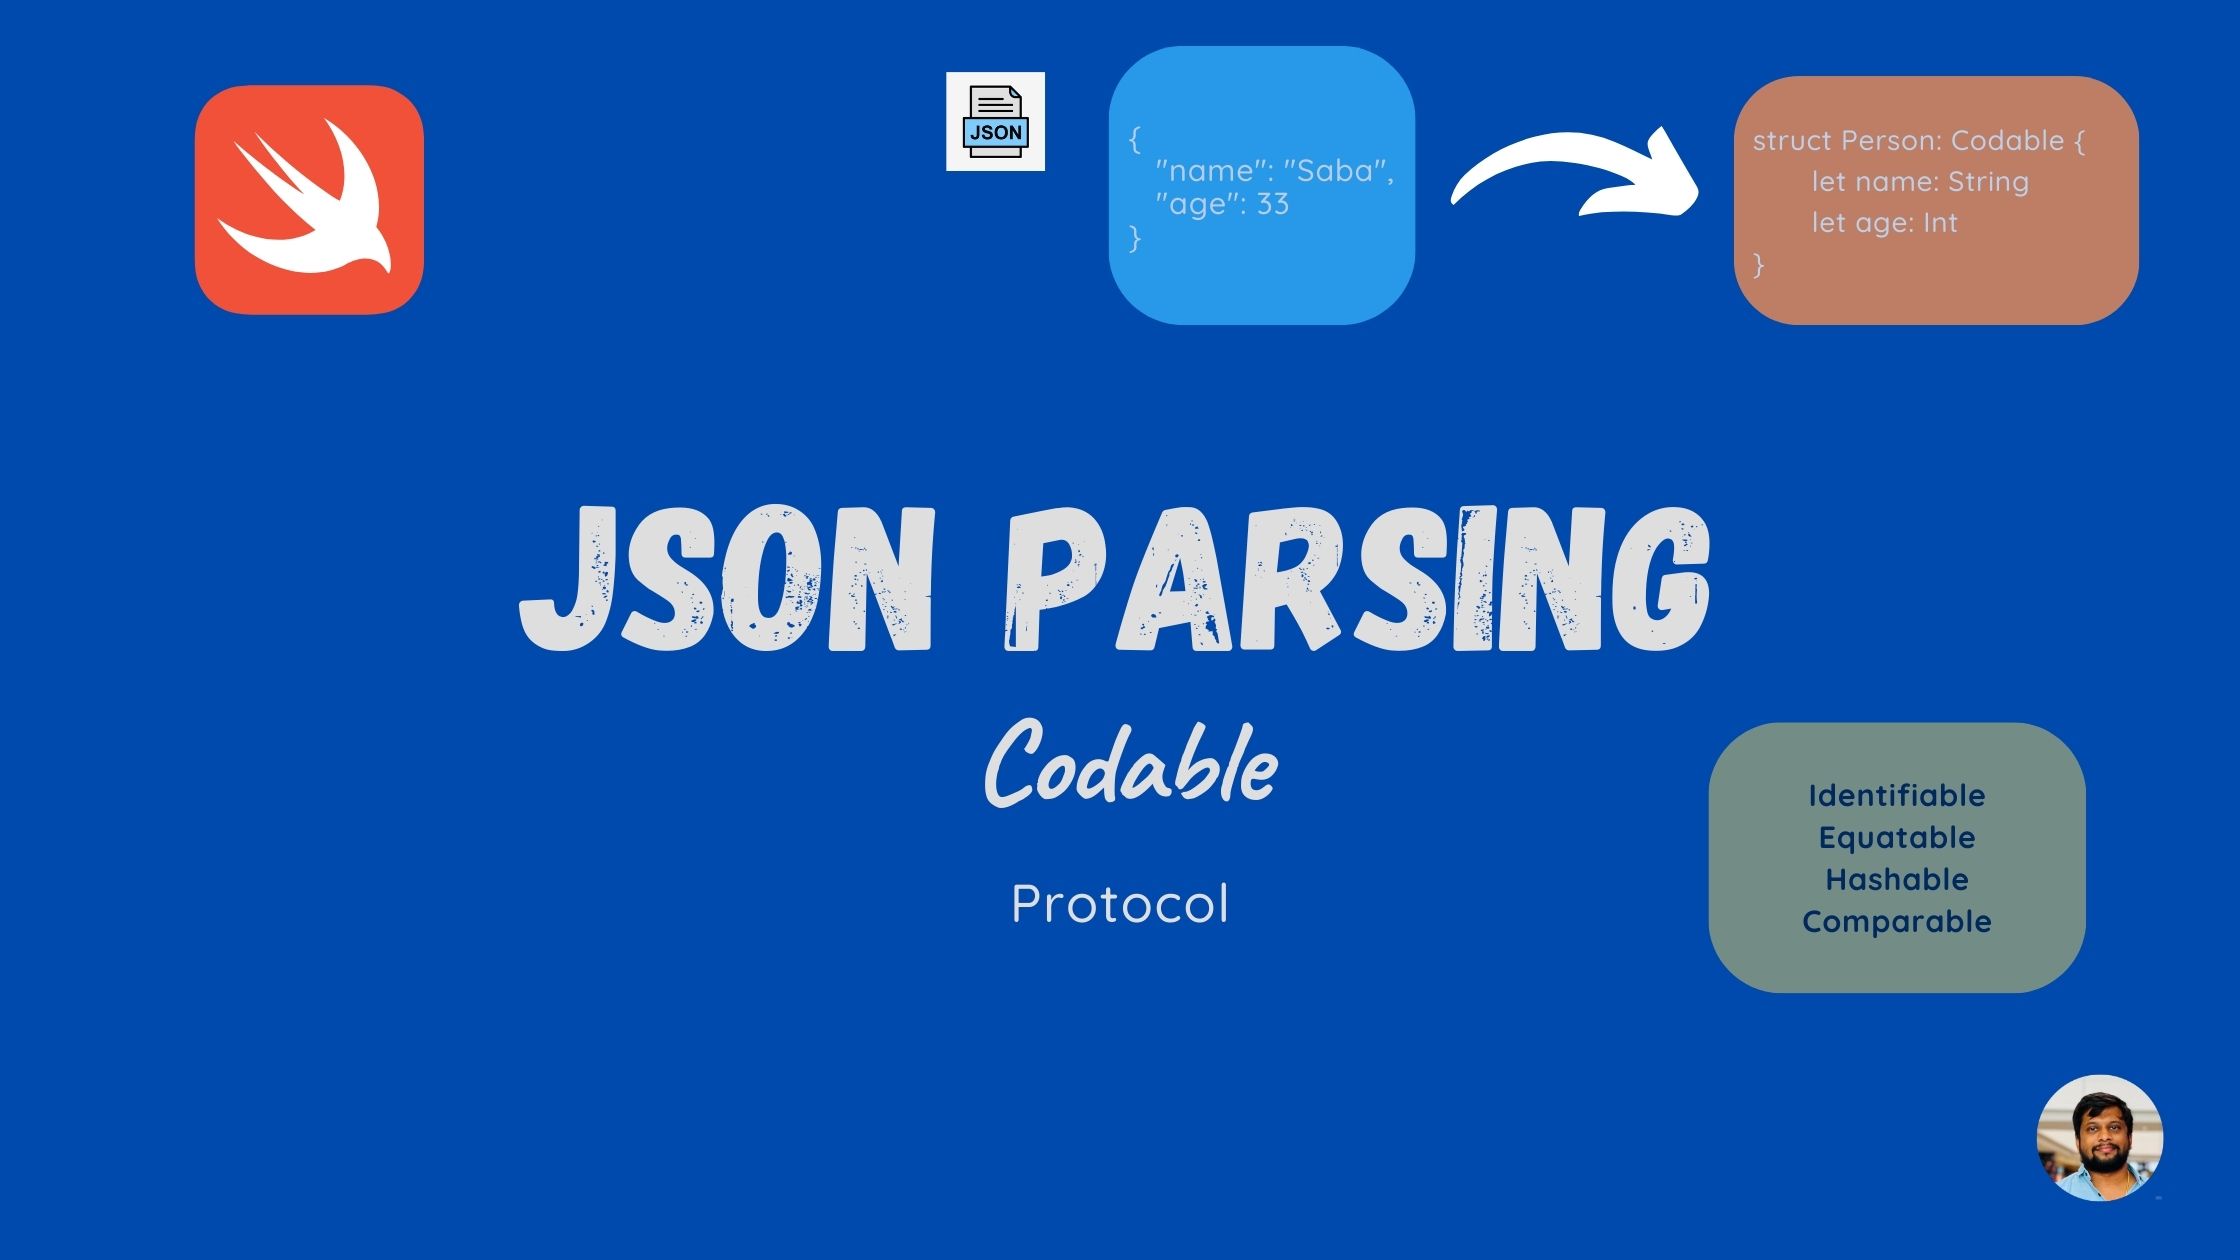 Master the art of JSON parsing in iOS with our in-depth guide on utilizing Coding Keys. Learn efficient techniques to map JSON data to Swift models.